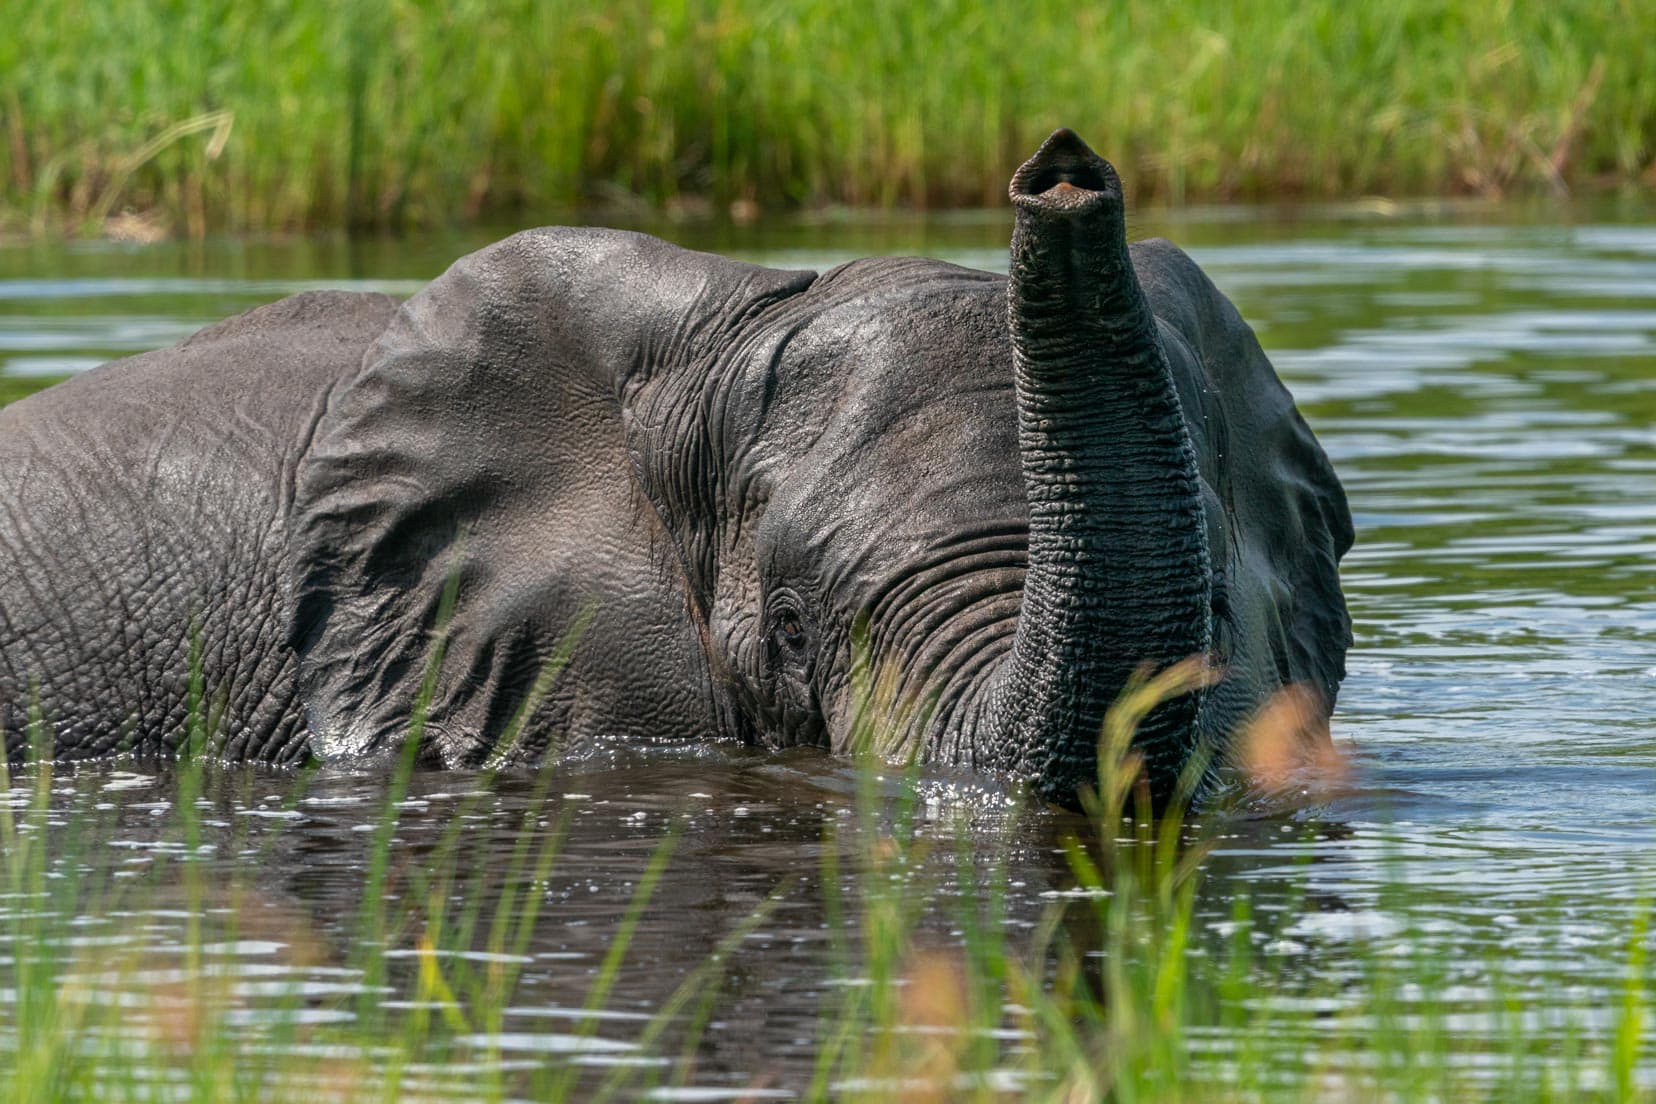 Elephant in a river with it's trunk up above the water